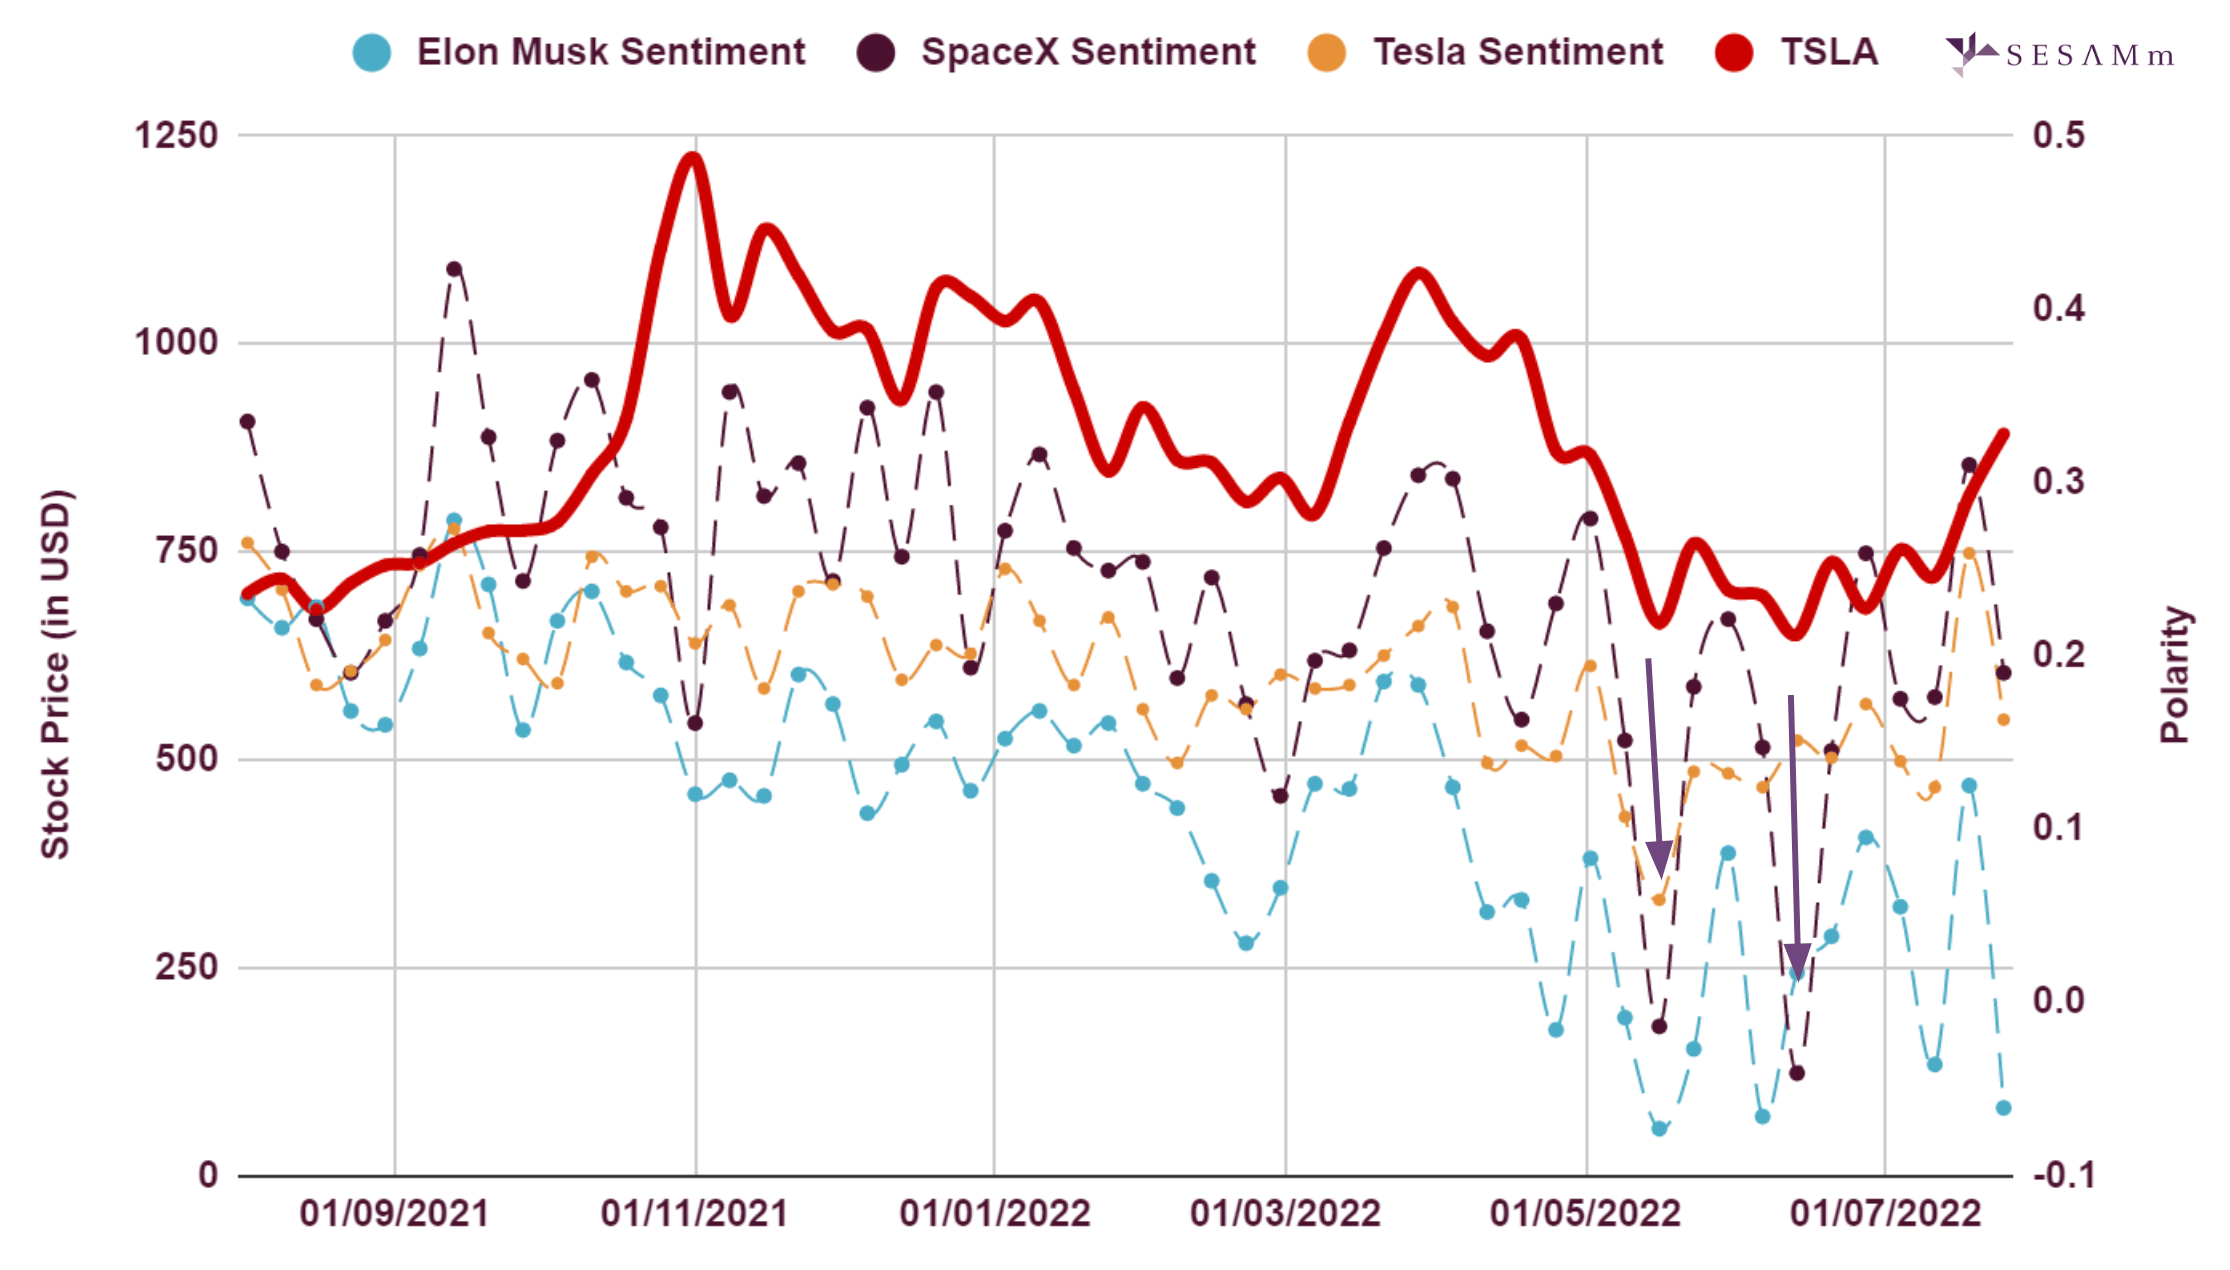 Tesla stock price and polarity chart for Musk, SpaceX, and Tesla sentiment